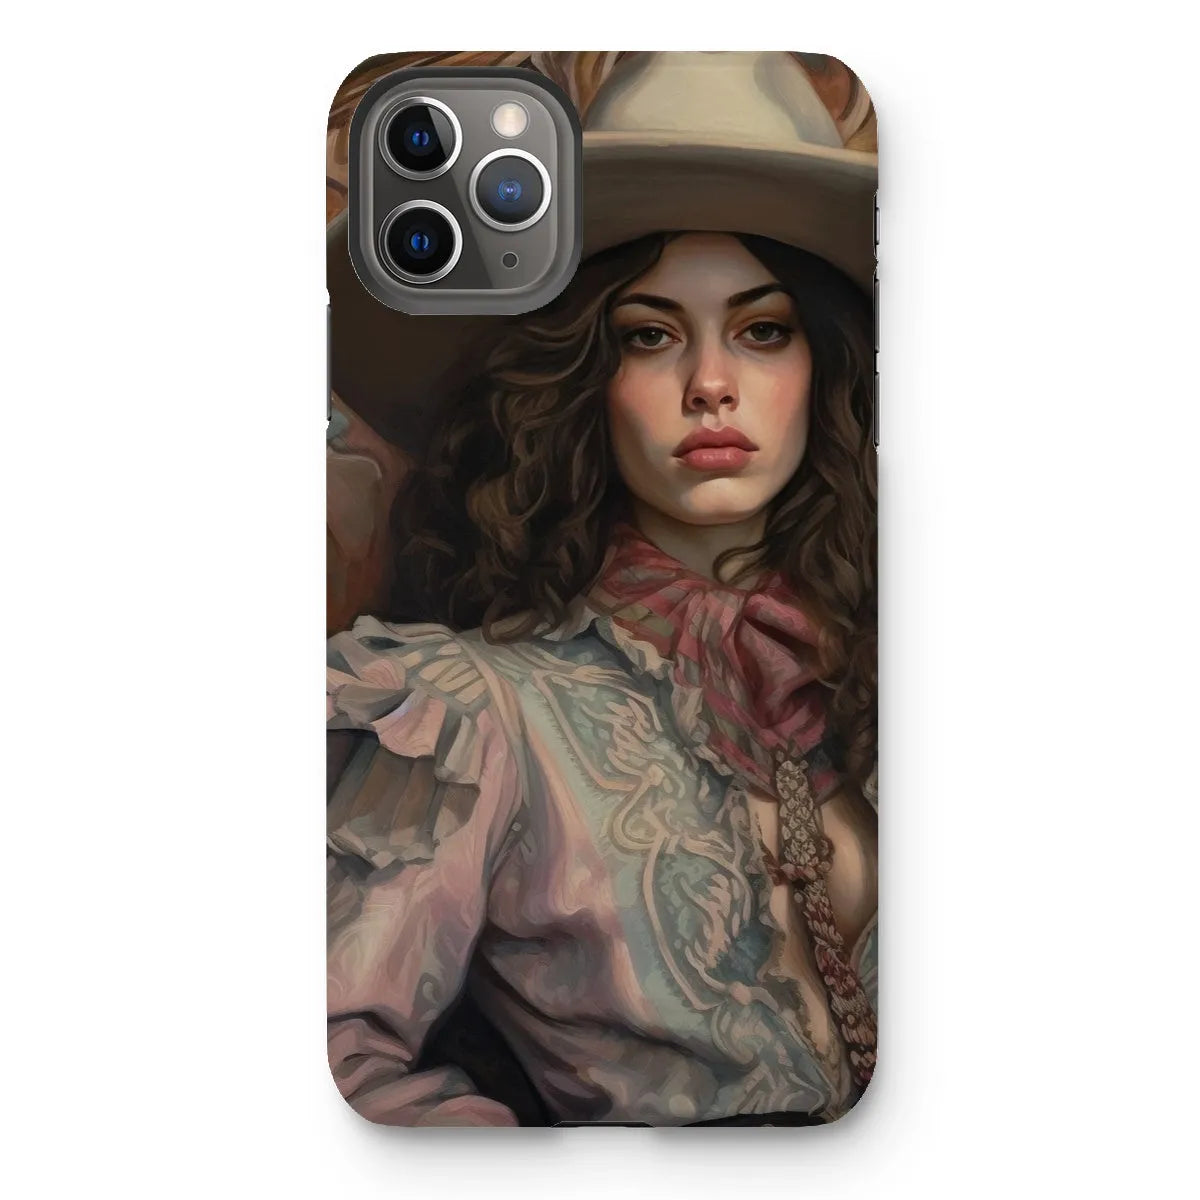 Alex The Lesbian Cowgirl - Sapphic Art Phone Case - Iphone 11 Pro Max / Matte - Mobile Phone Cases - Aesthetic Art